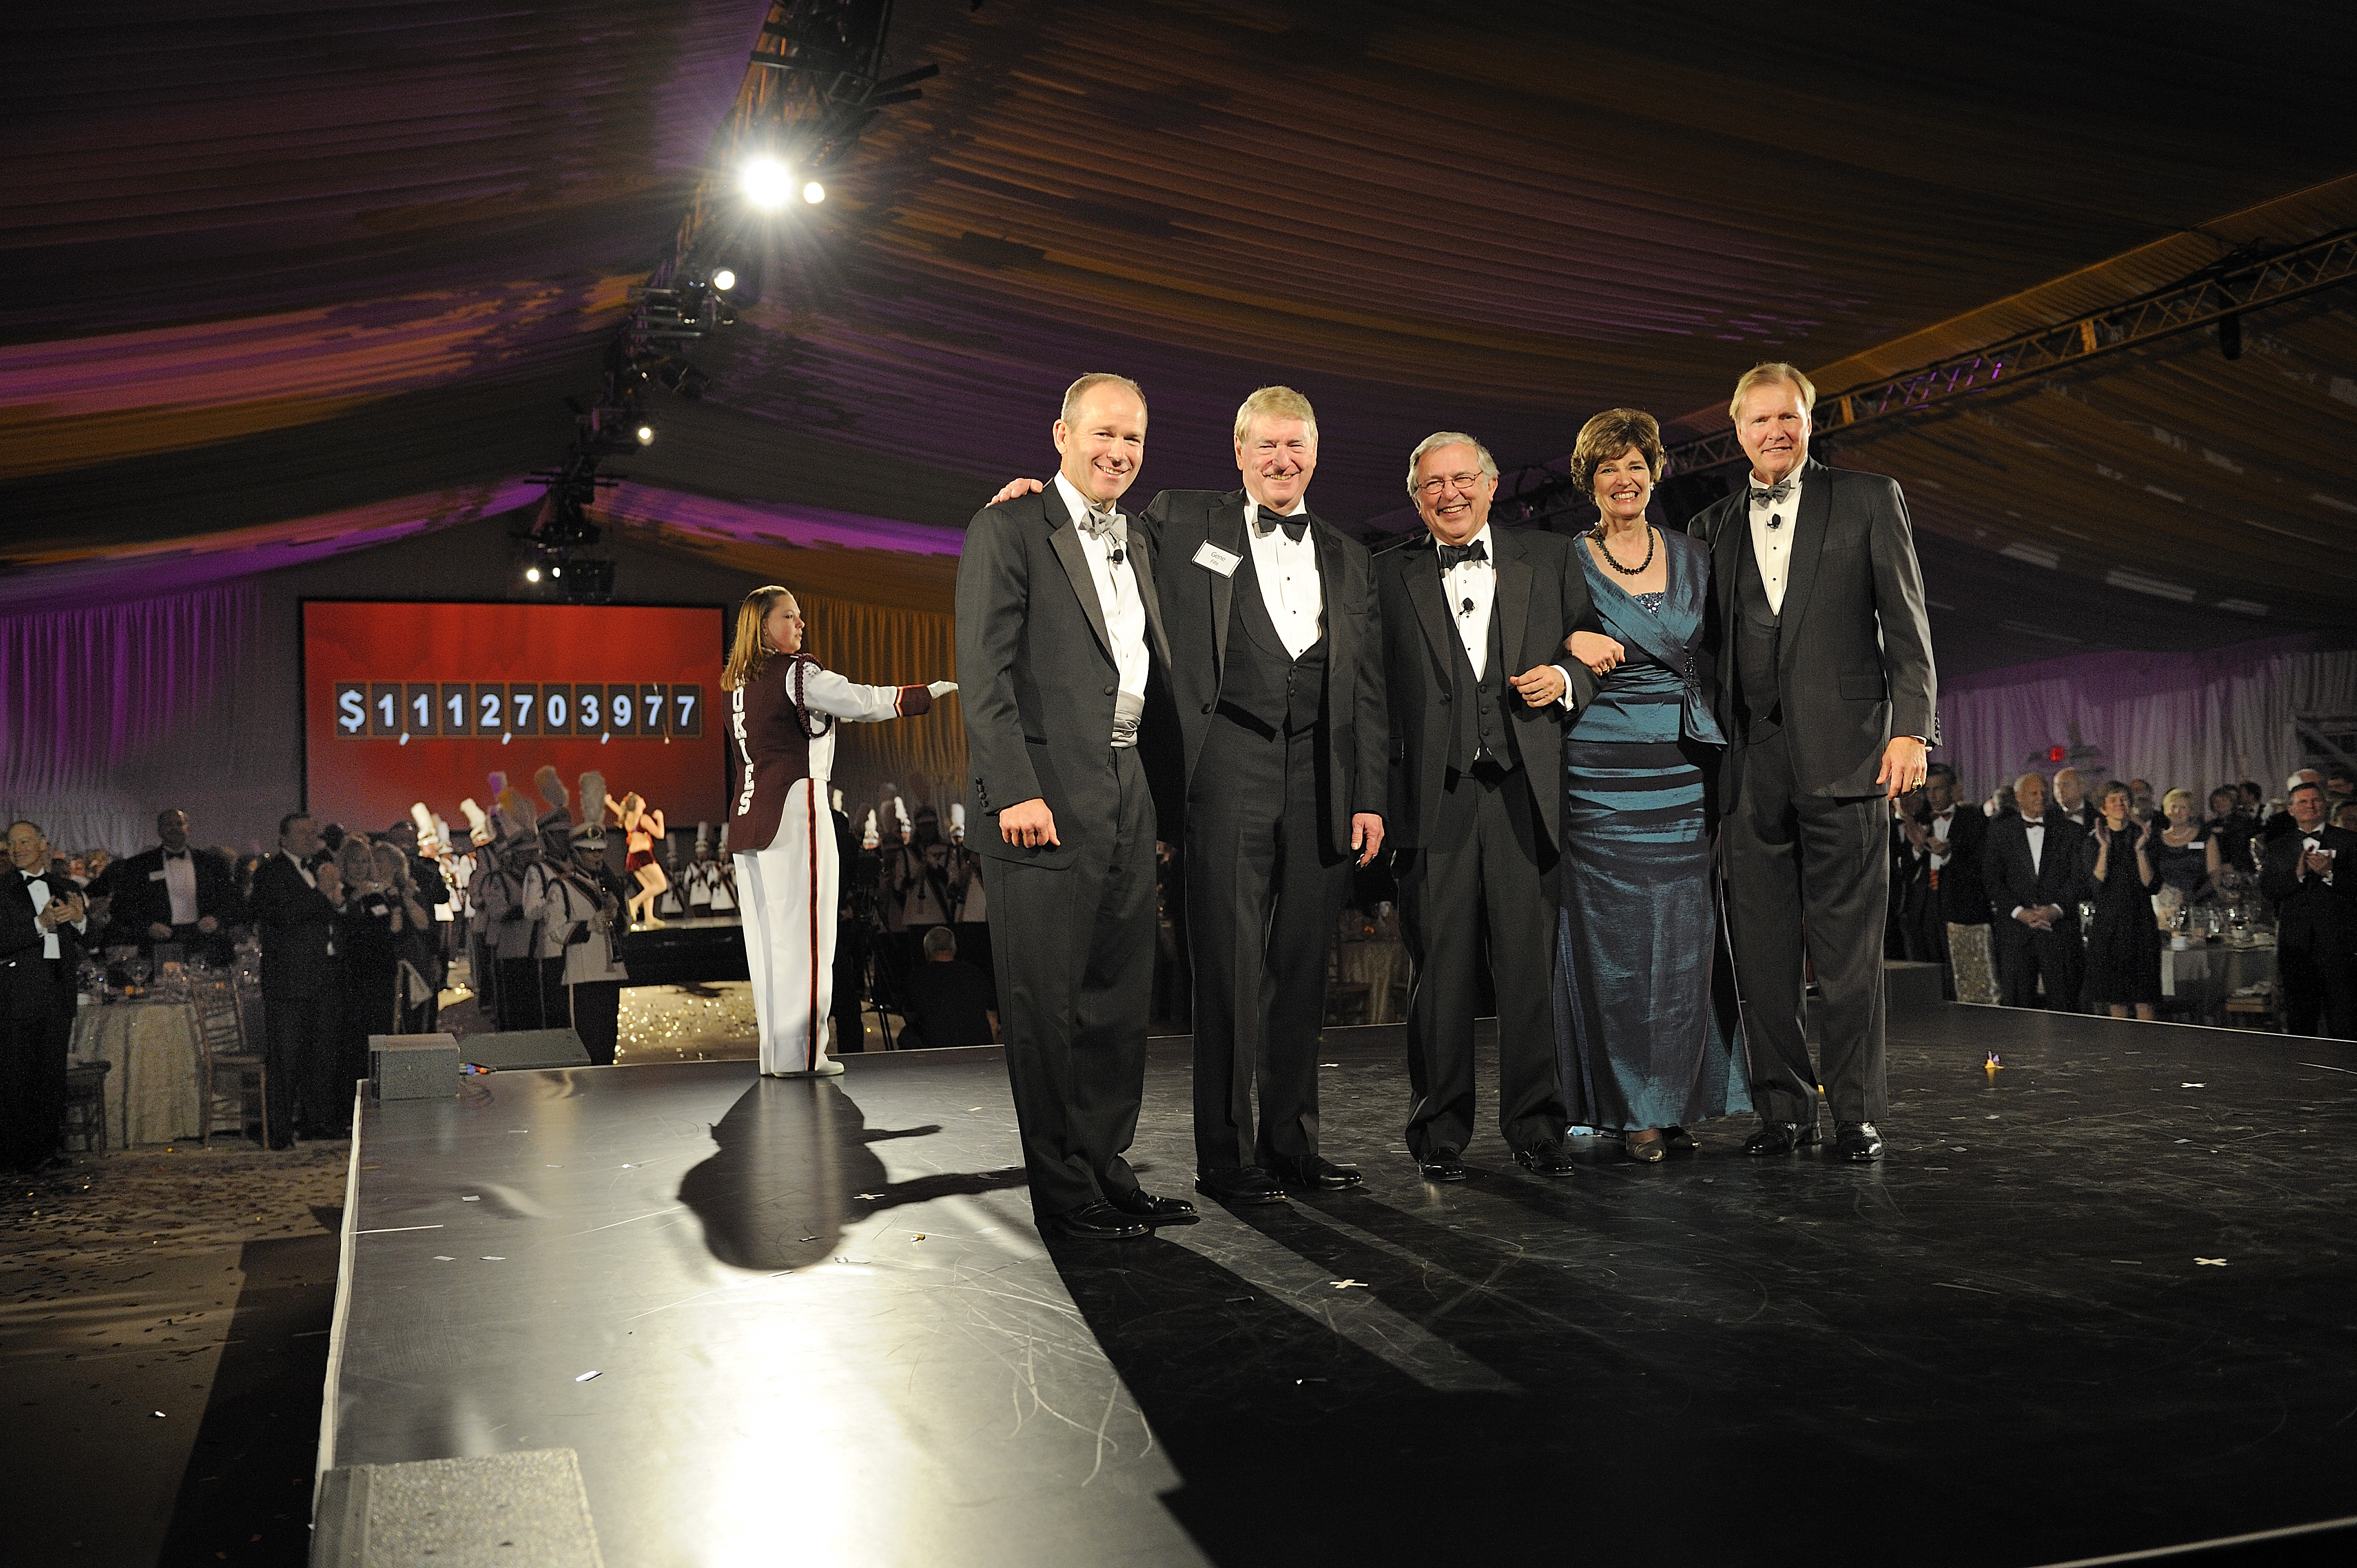 (From left) David Calhoun, Gene Fife, Virginia Tech President Charles W. Steger, Elizabeth Flanagan, and John Lawson appear before the screen that revealed the total amount raised during The Campaign for Virginia Tech: Invent the Future. 